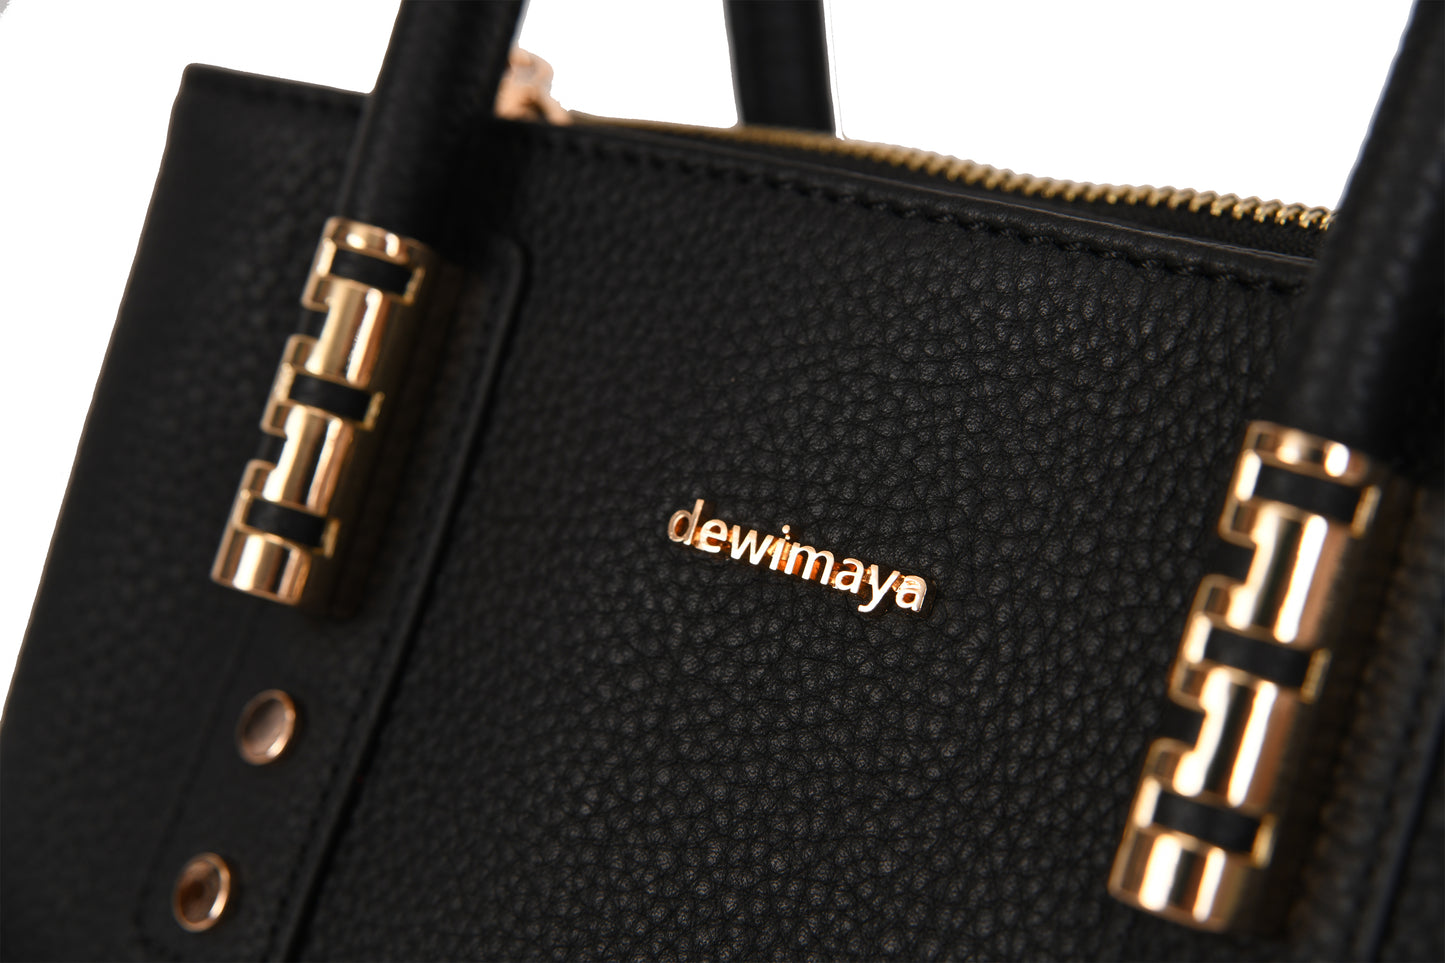 Ayana Black Pebble Grain Leather Small Handbag made by Dewi Maya gold logo available at the best boutique in Upstate South Carolina Spartanburg Greenville Dewi Maya Boutique